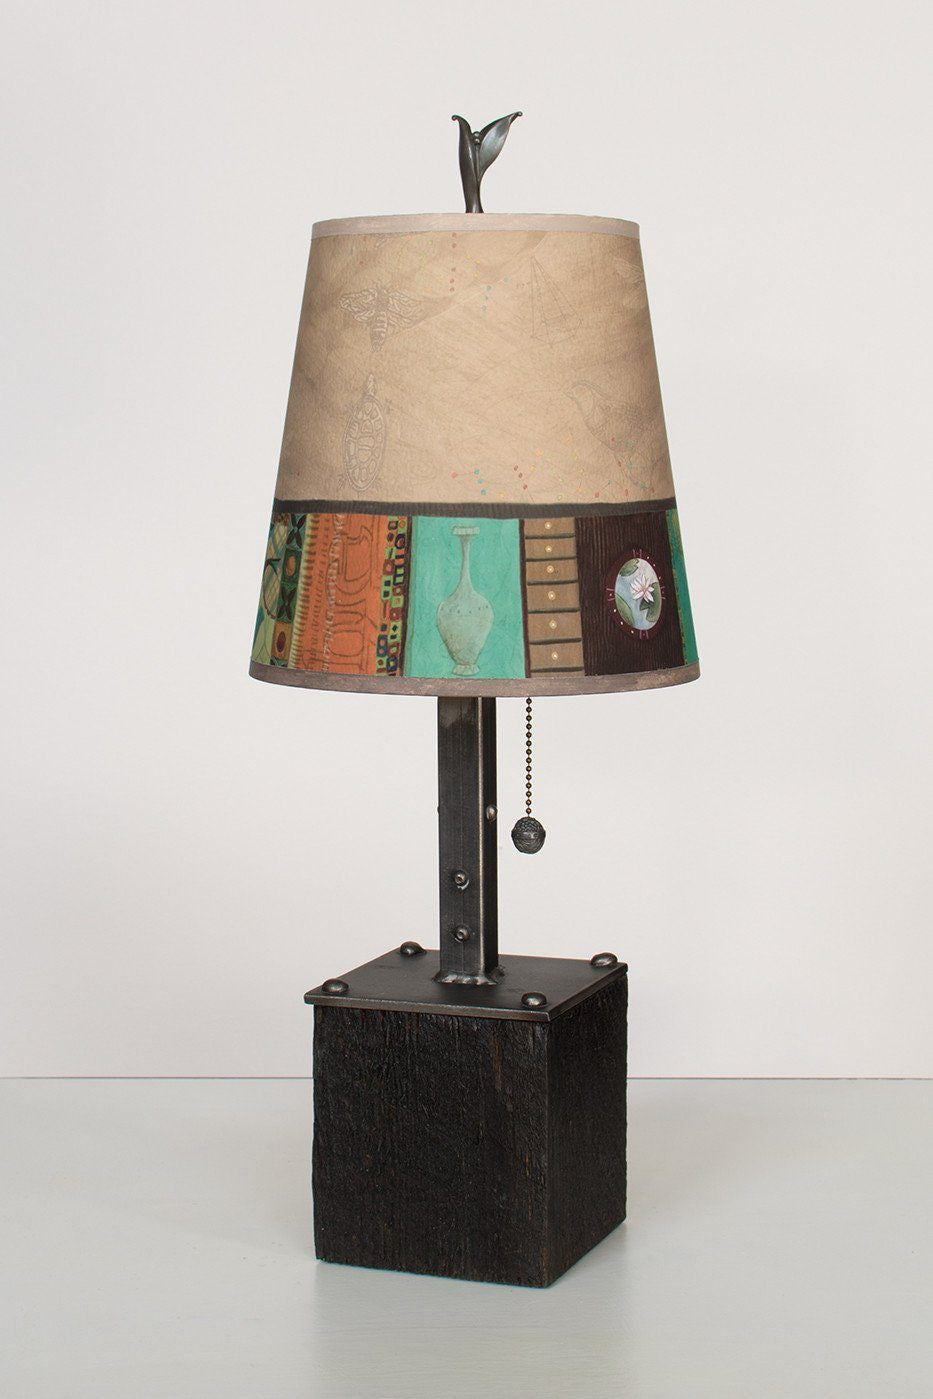 Steel Table Lamp on Reclaimed Wood with Small Drum Shade in Linen Match